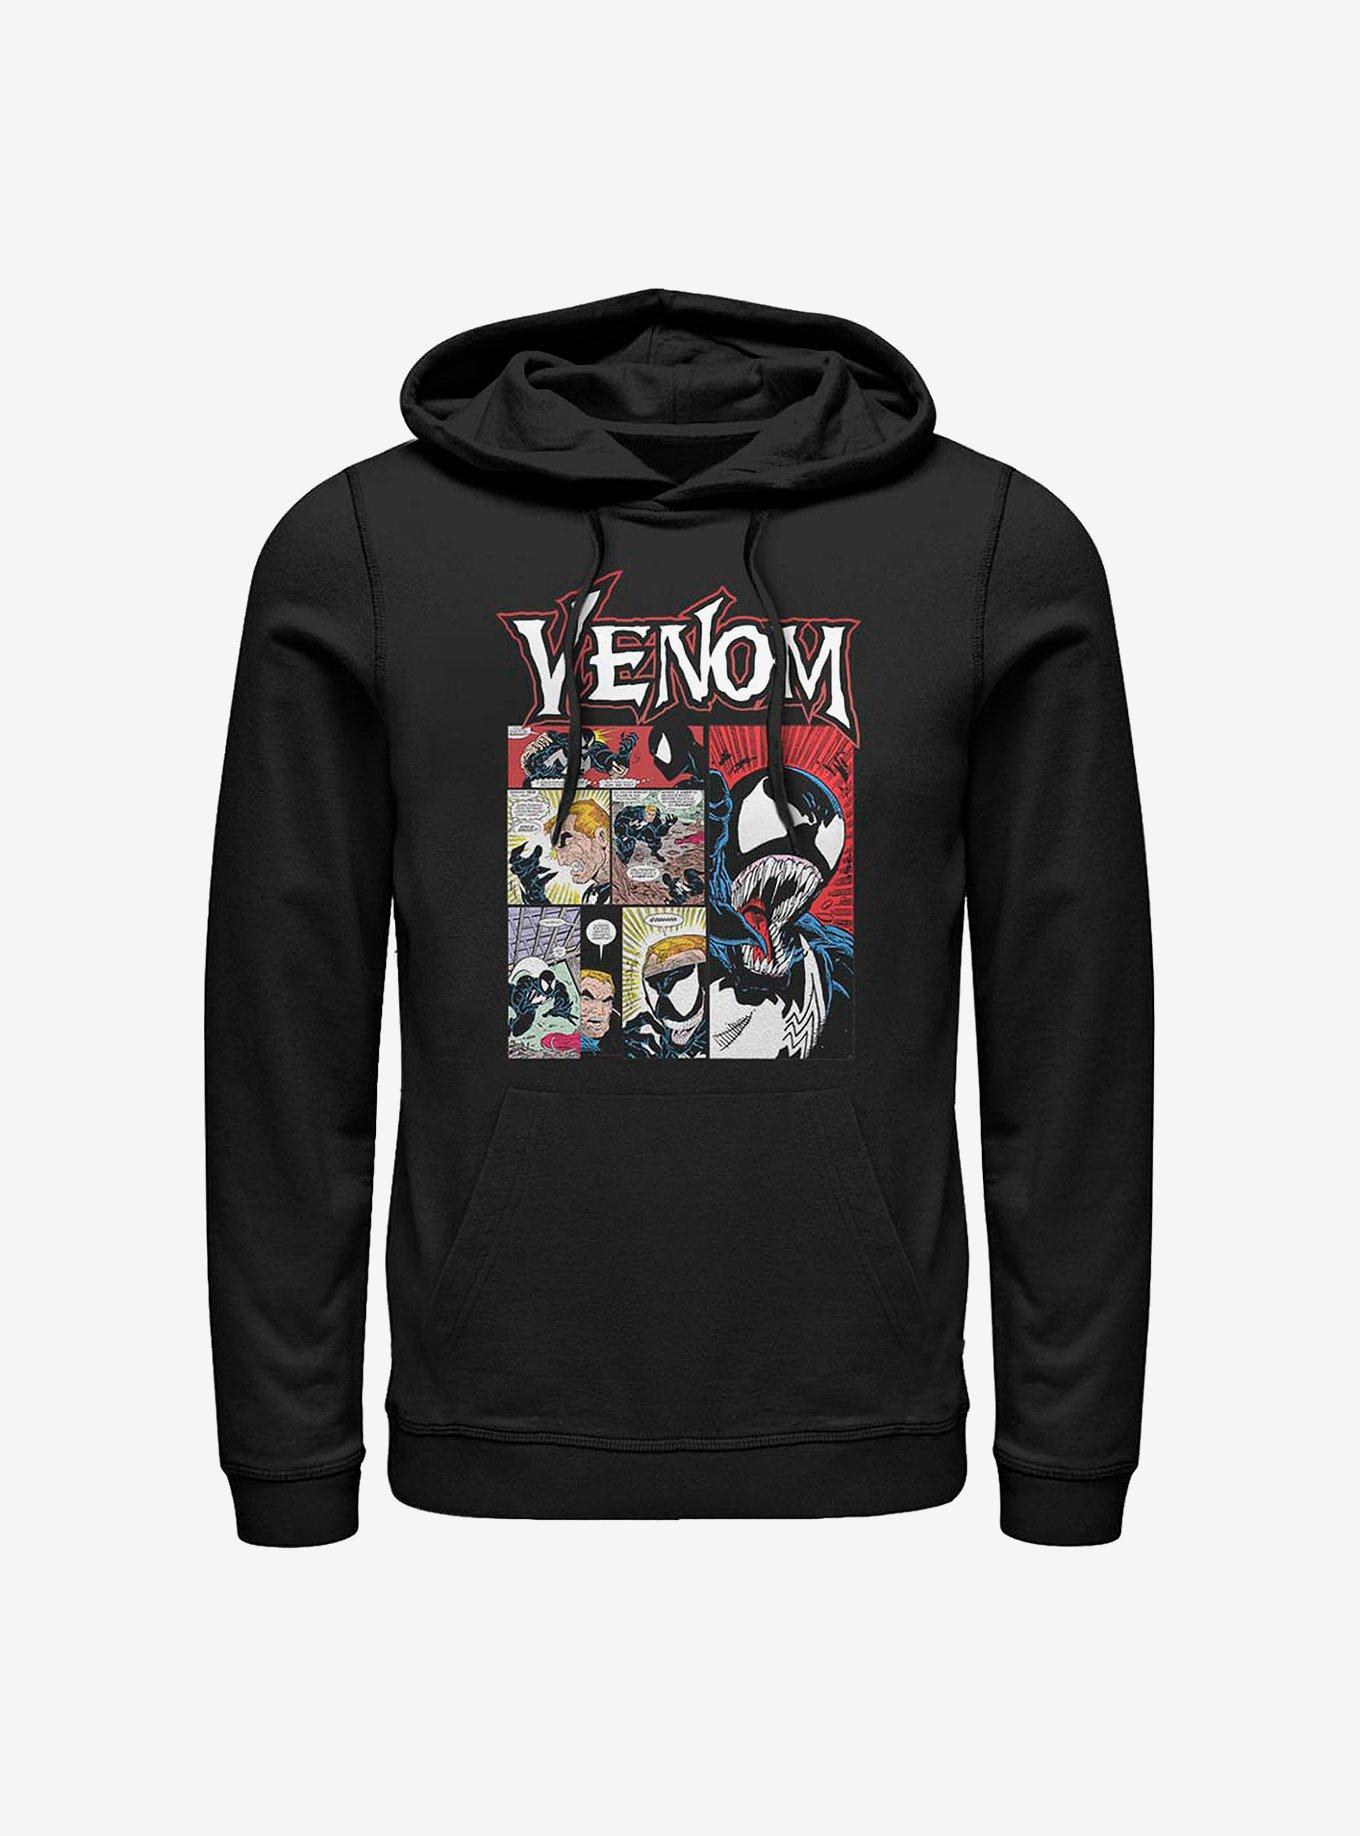 Marvel Venom: Let There Be Carnage Whom The Bell Tolls Hoodie, BLACK, hi-res